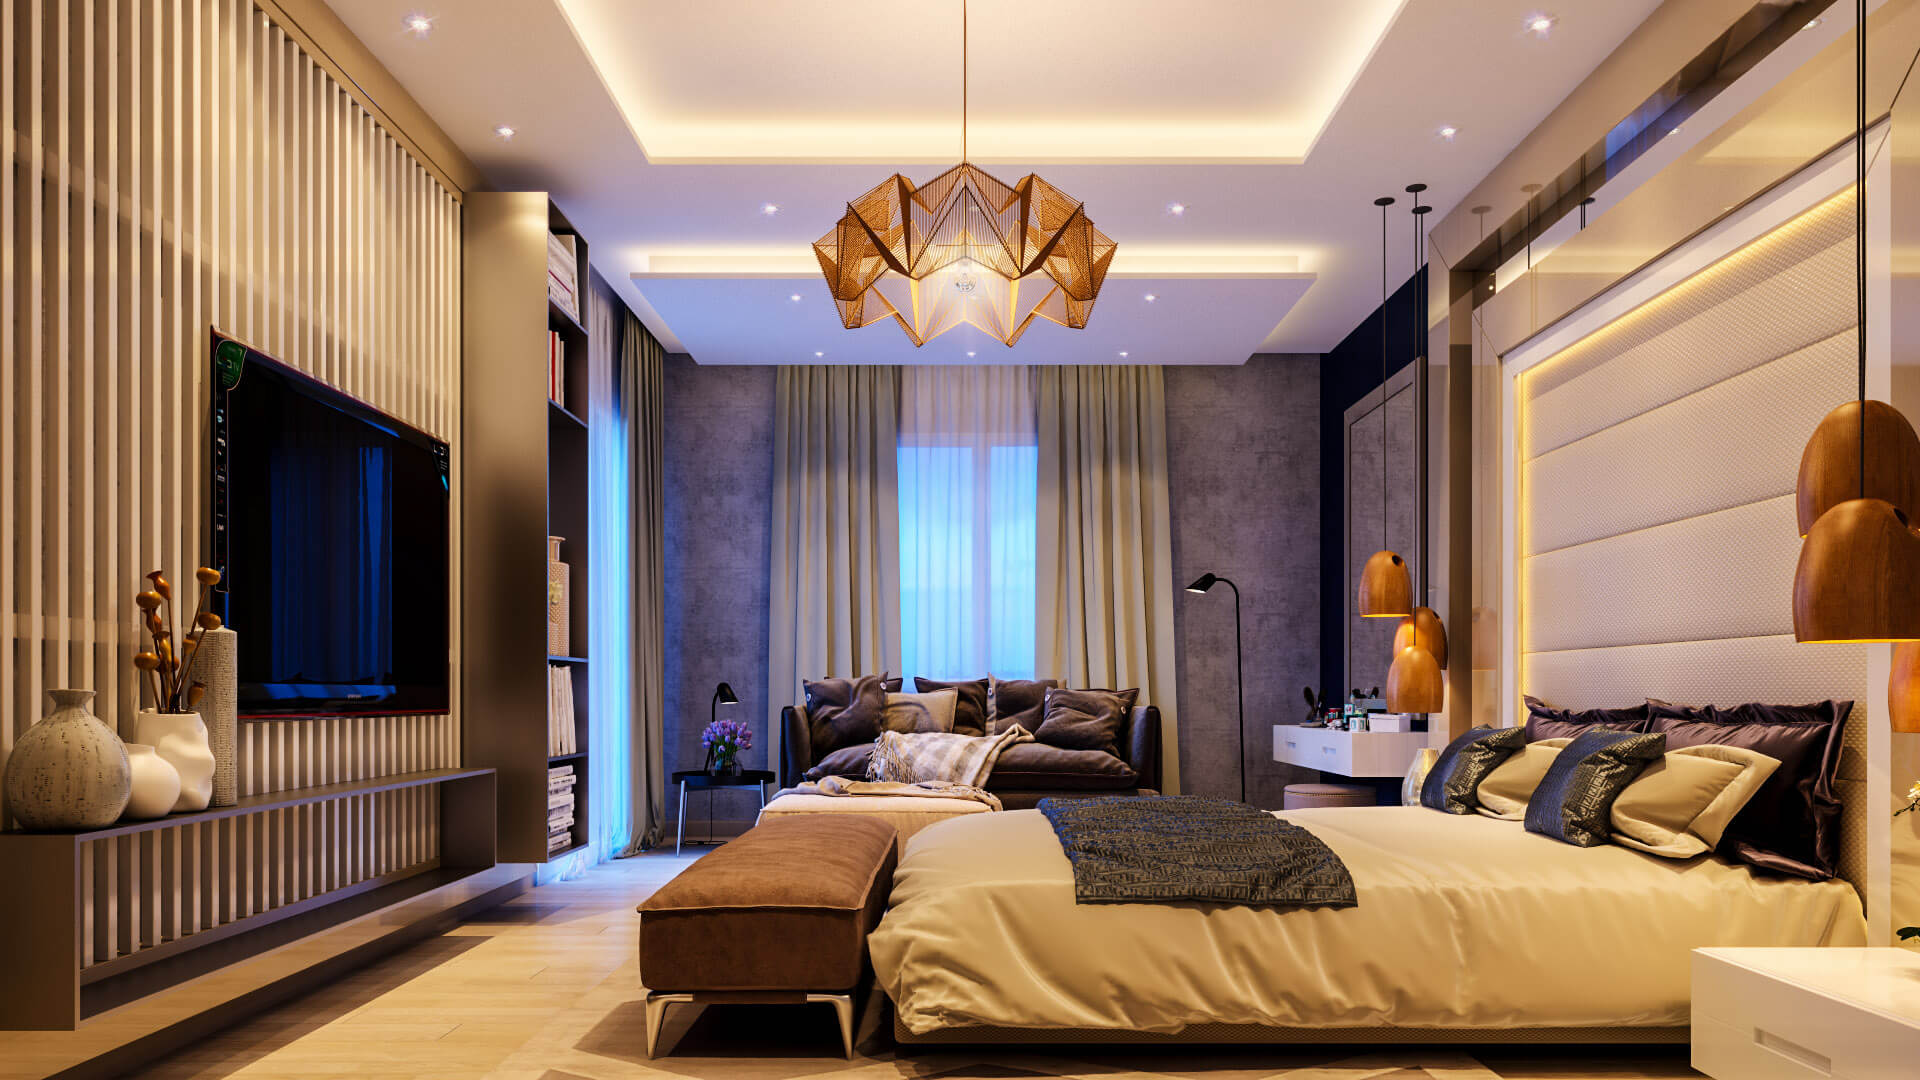 LUXURIOUS BEDROOM DESIGN WITH THE ROMANTIC COUPLE RUG - ROOM BY